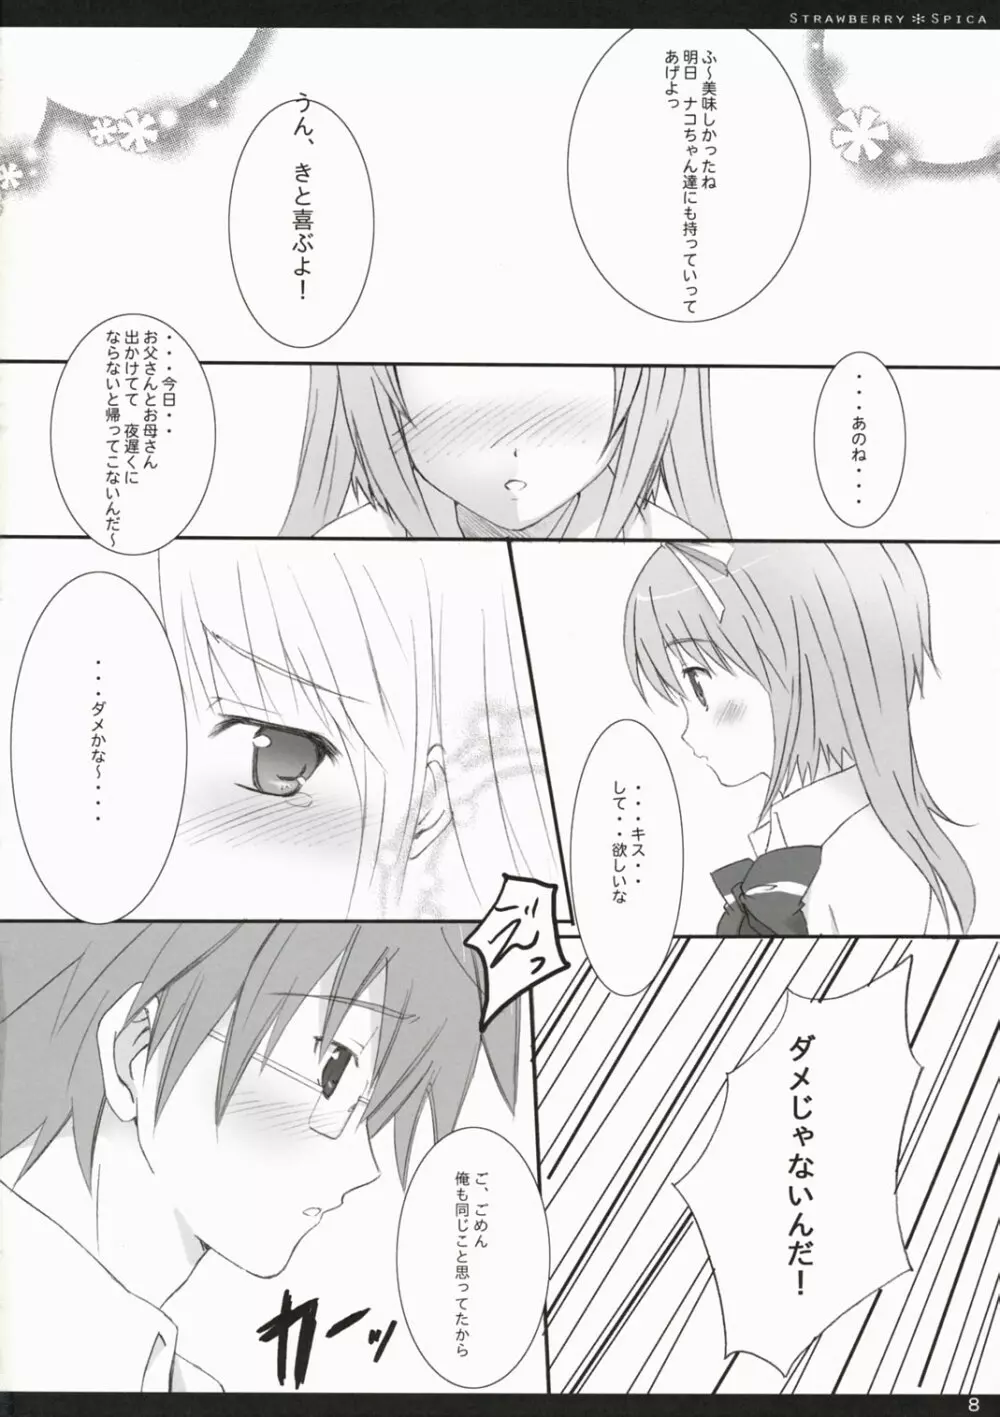 Strawberry Spica Page.7